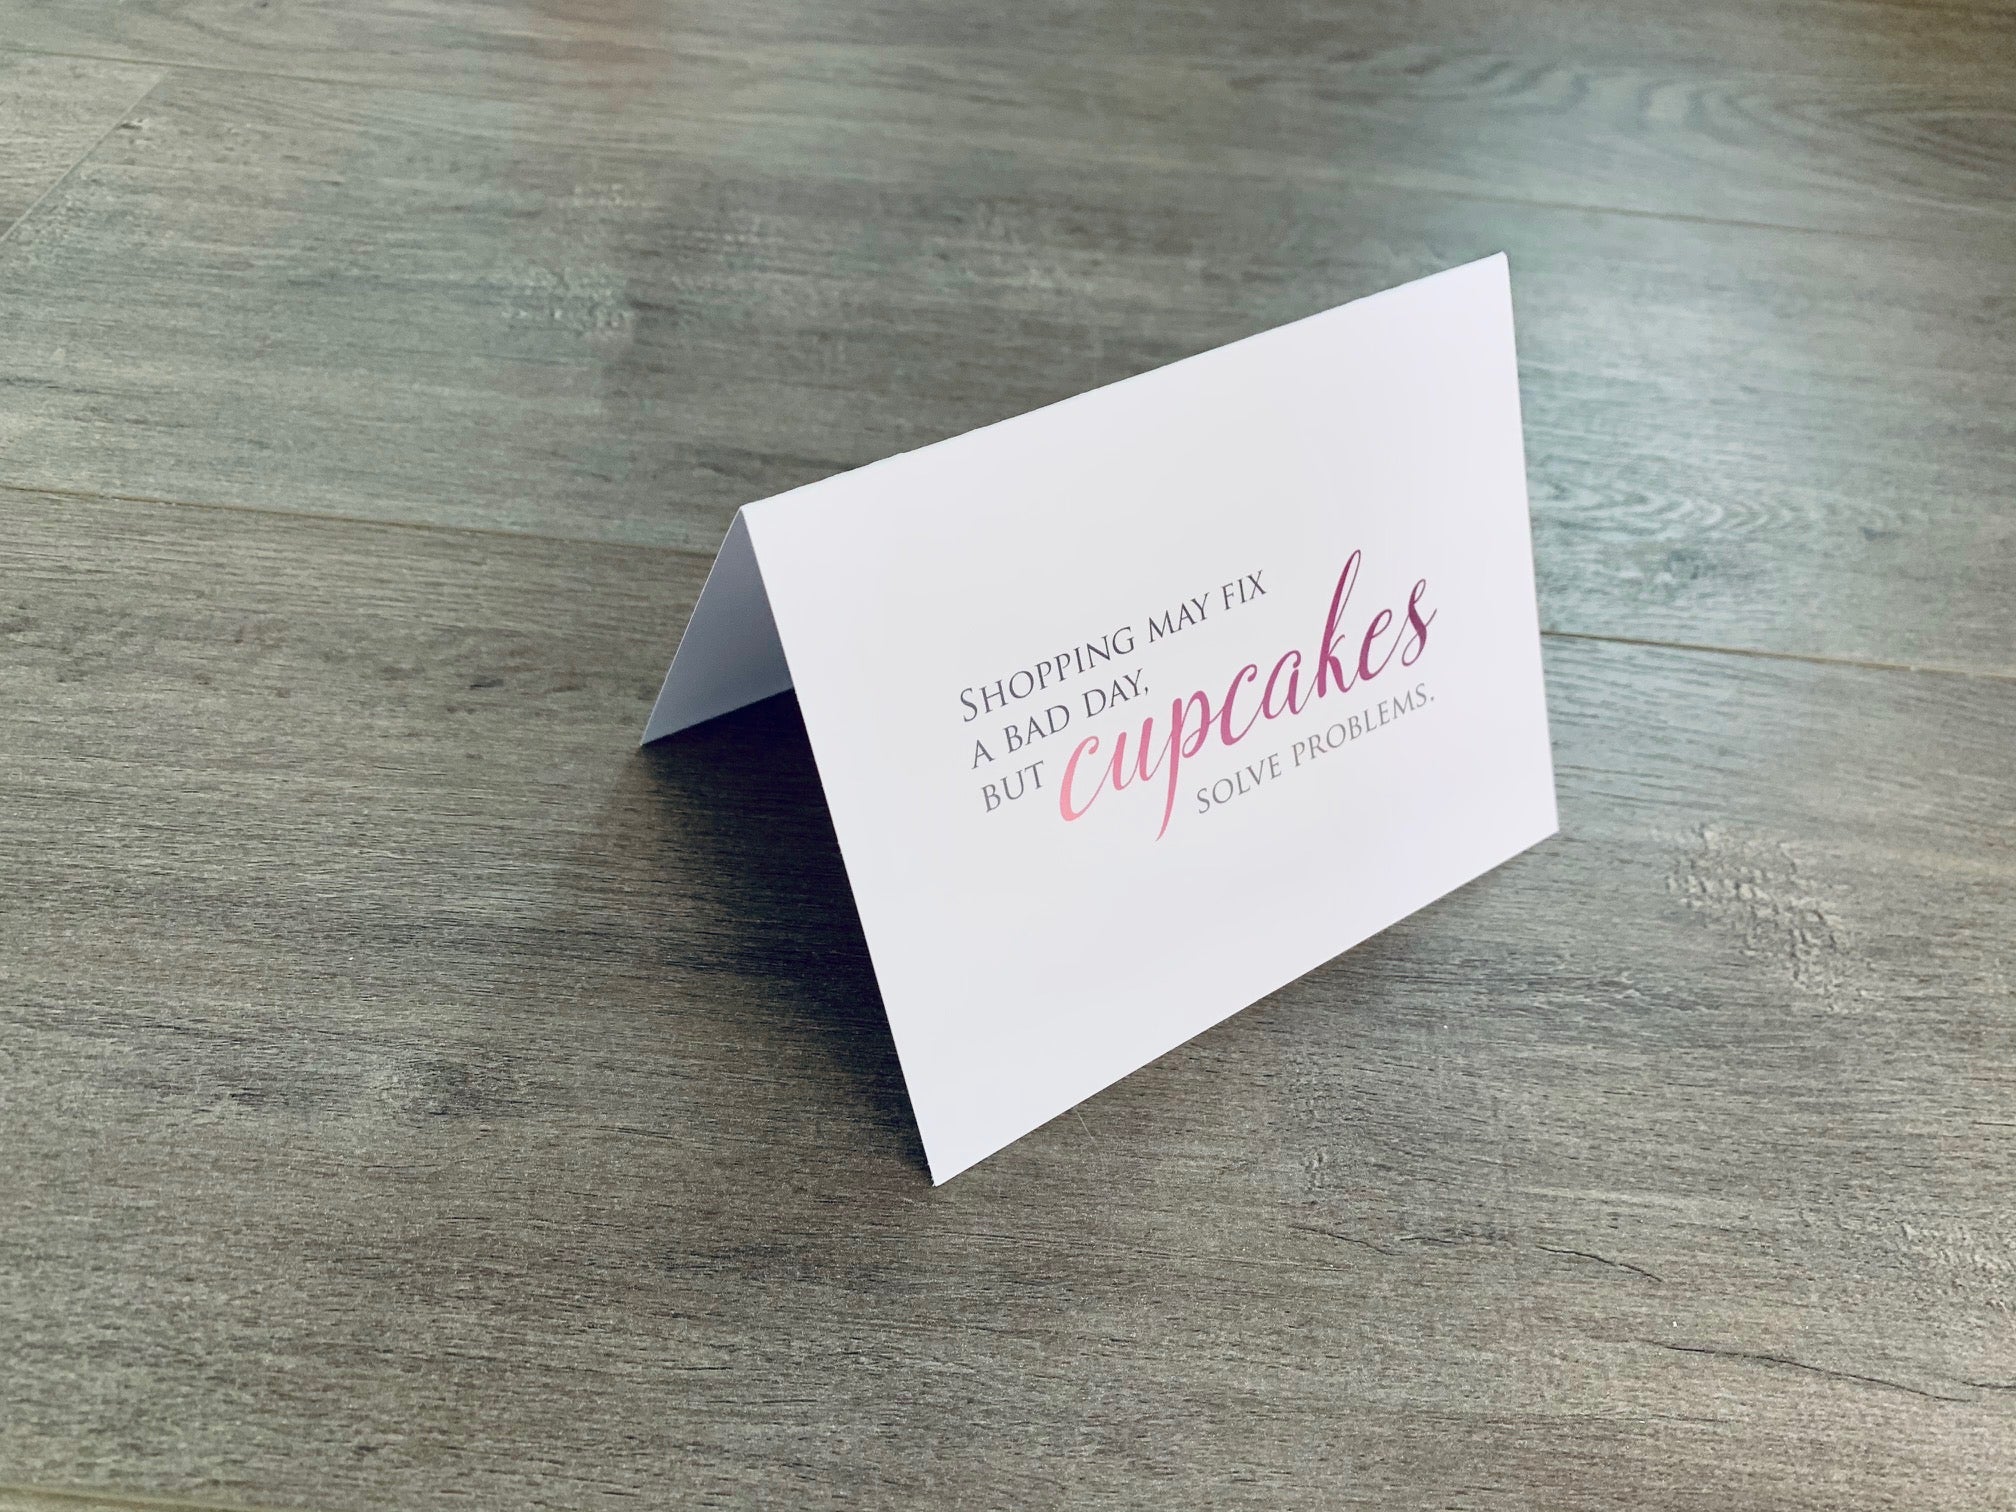 A white card is propped on a gray wood floor. The card reads, "Shopping may fix a bad day, but cupcakes solve problems." Bakers Collection by Stationare.